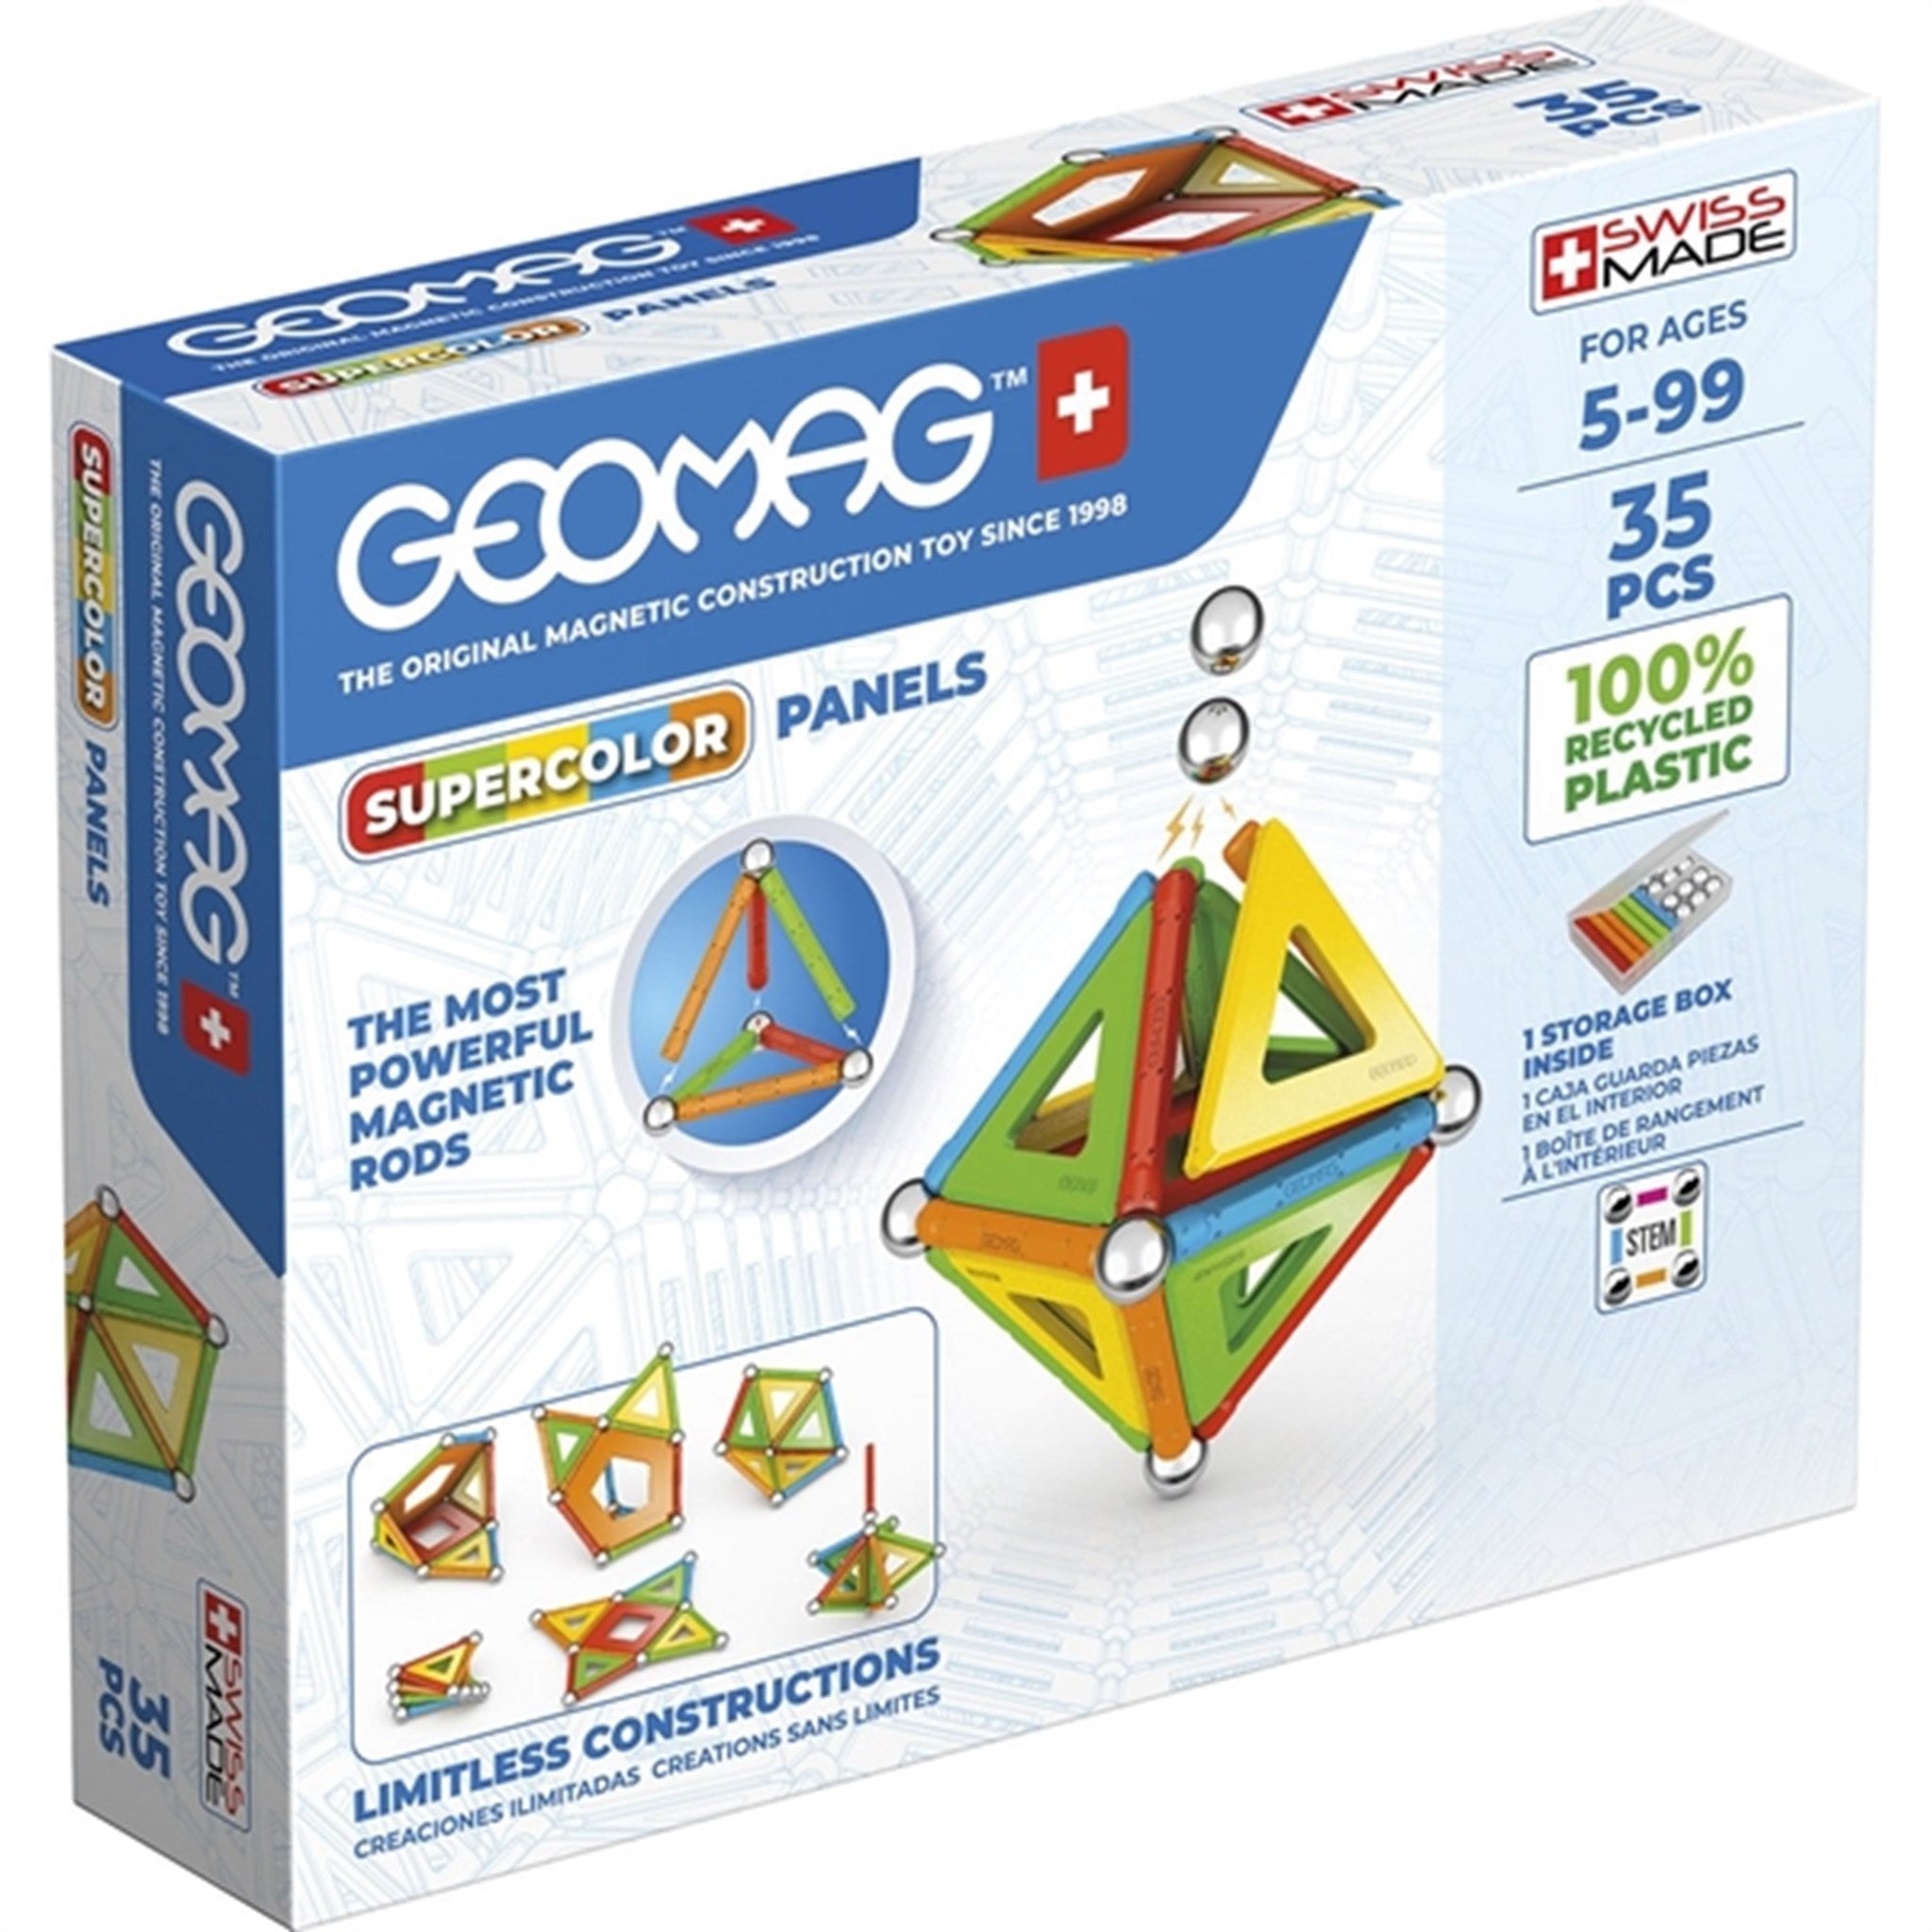 Geomag Supercolor Panels Recycled 35 stk